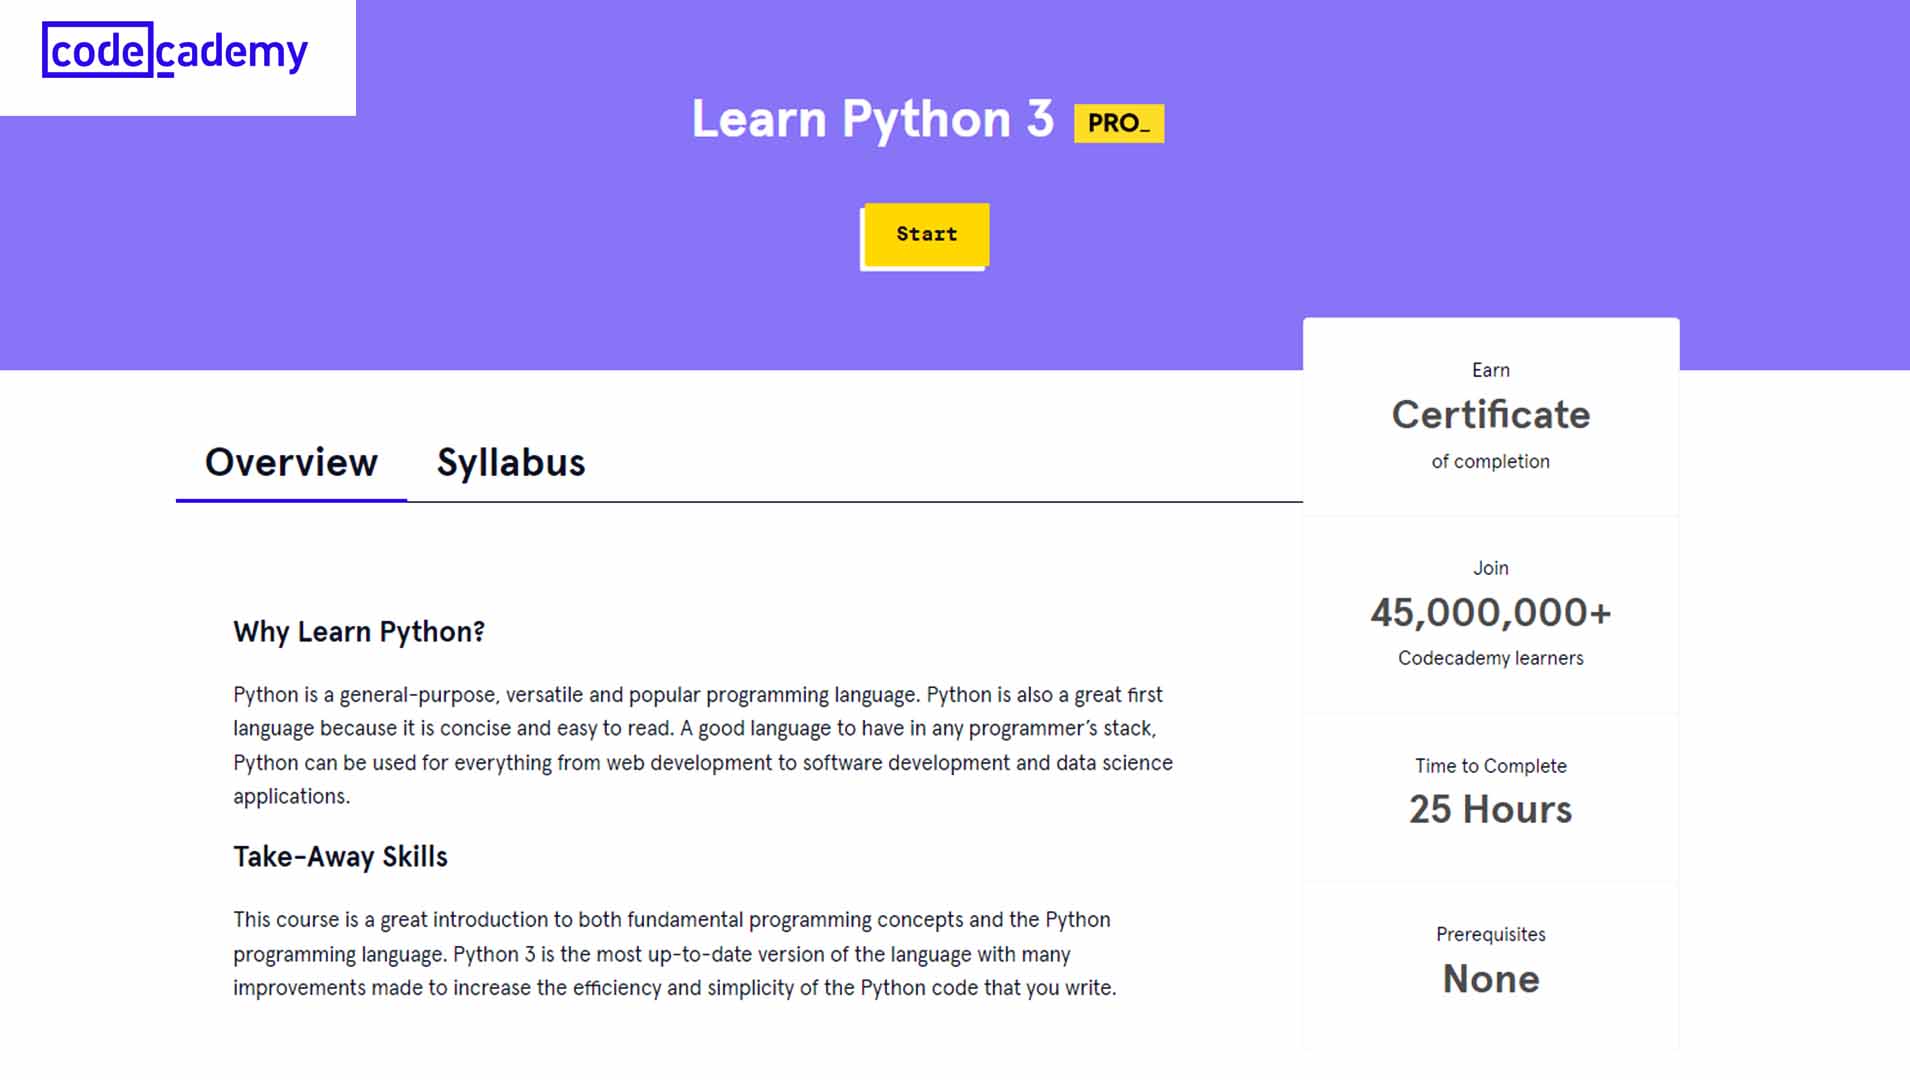 Python 3 Tutorial from Codecademy